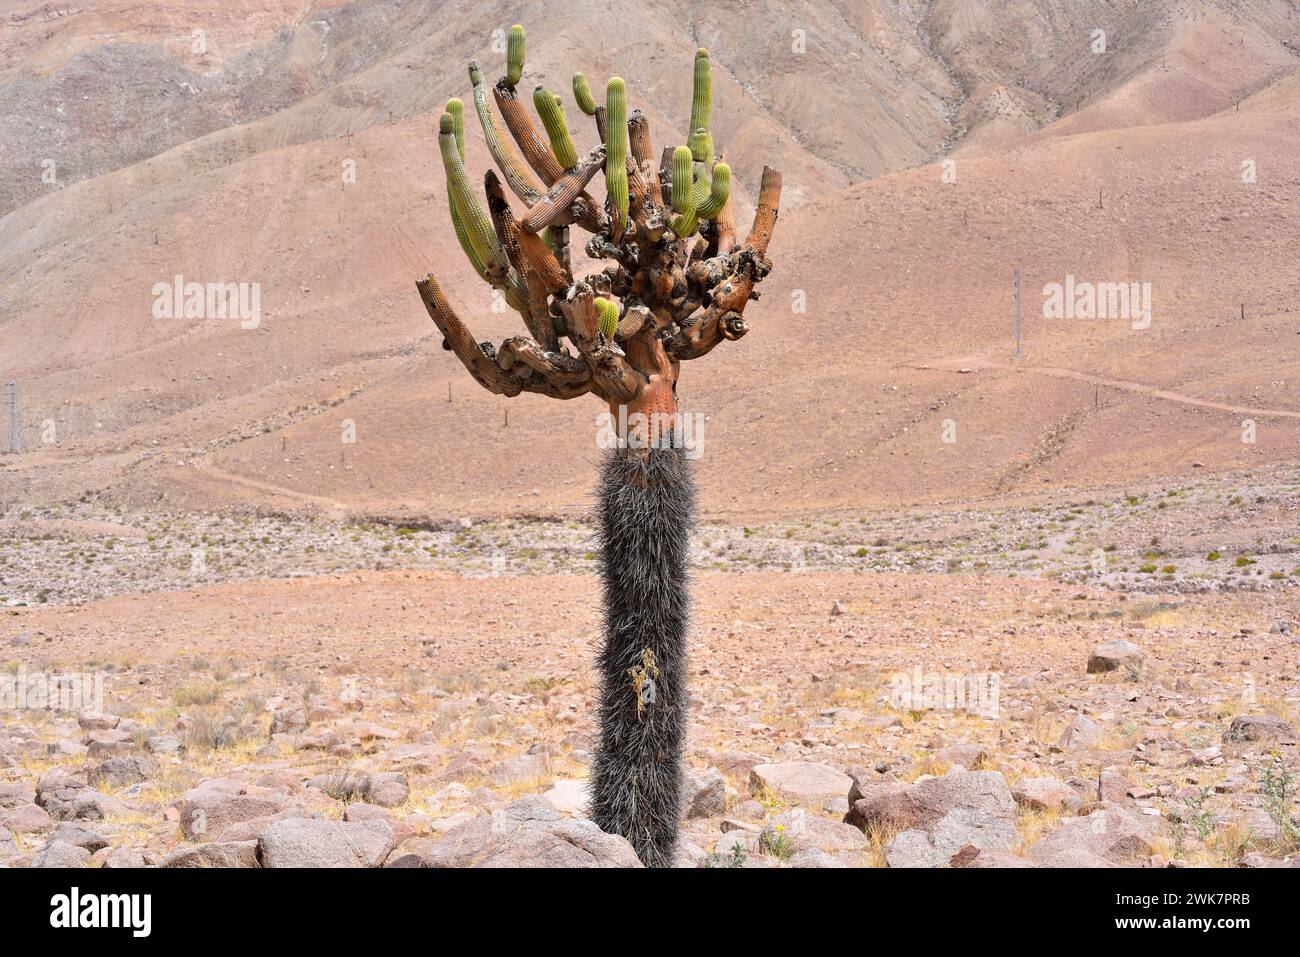 Candleholder cactus or cactus candelabro (Browningia candelaris) is an arborescent cactus endemic to northern Chile and southern Peru.This photo was t Stock Photo